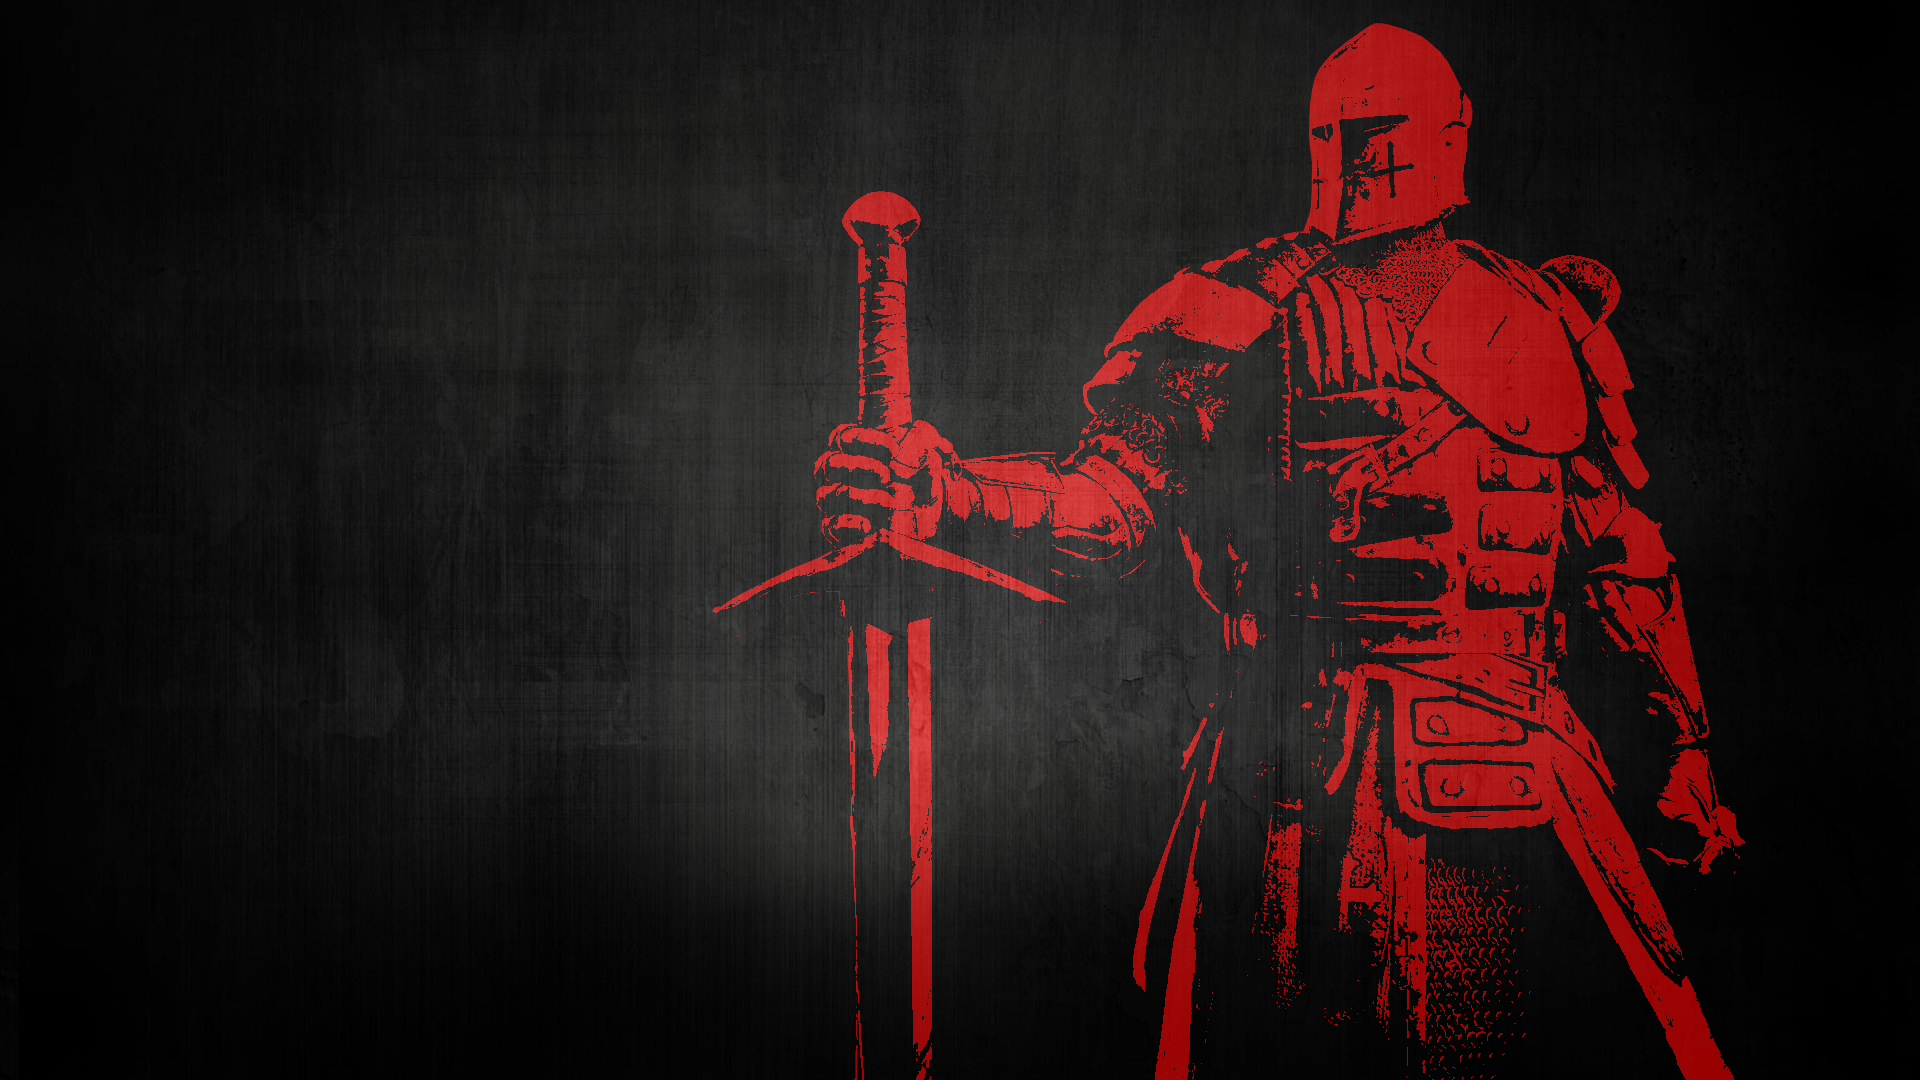 I spent all day making wallpaper for EVERY faction to enjoy, i